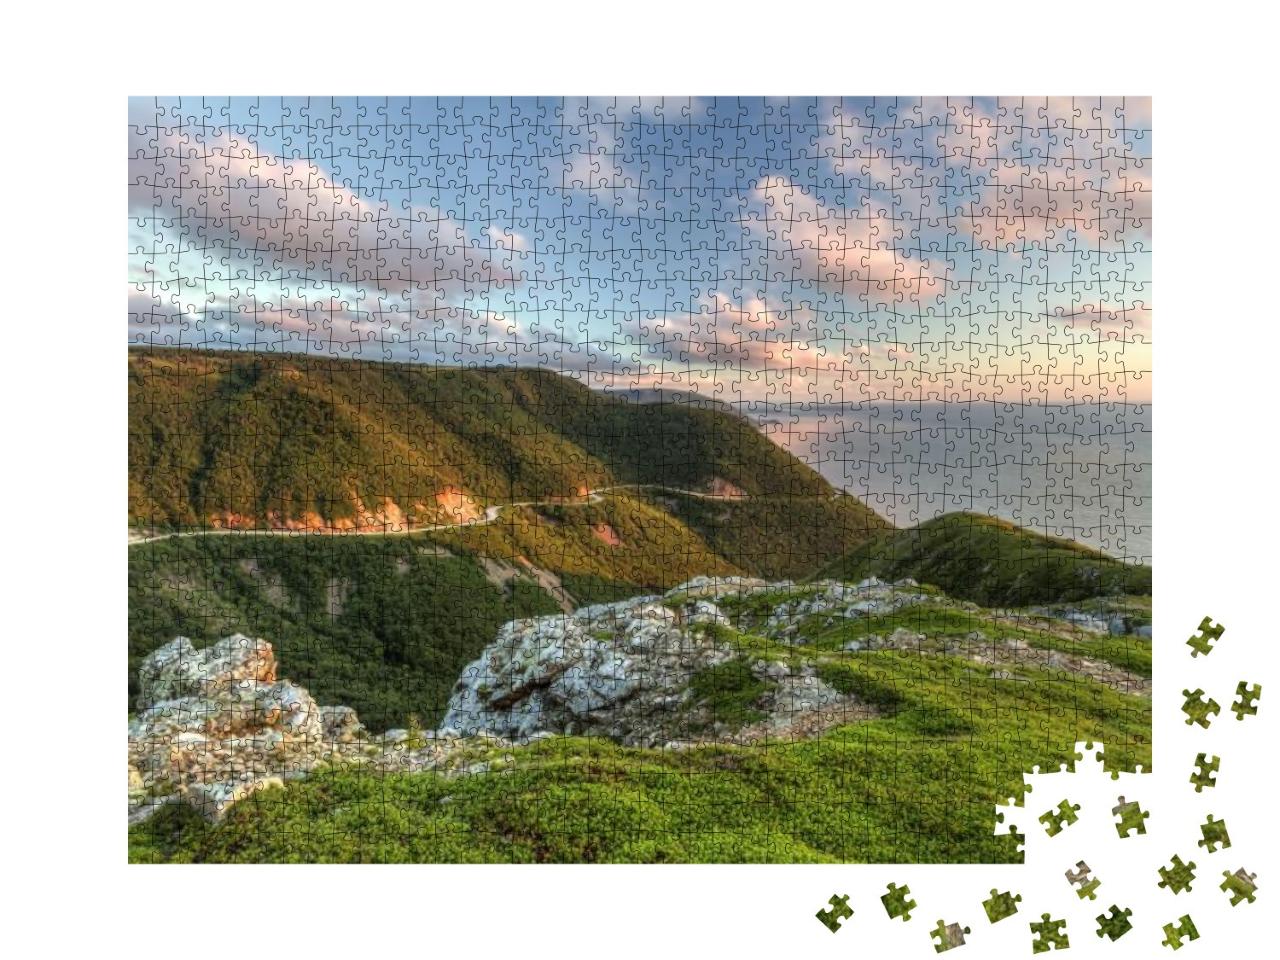 The Winding Cabot Trail Road Seen from High Above on the... Jigsaw Puzzle with 1000 pieces